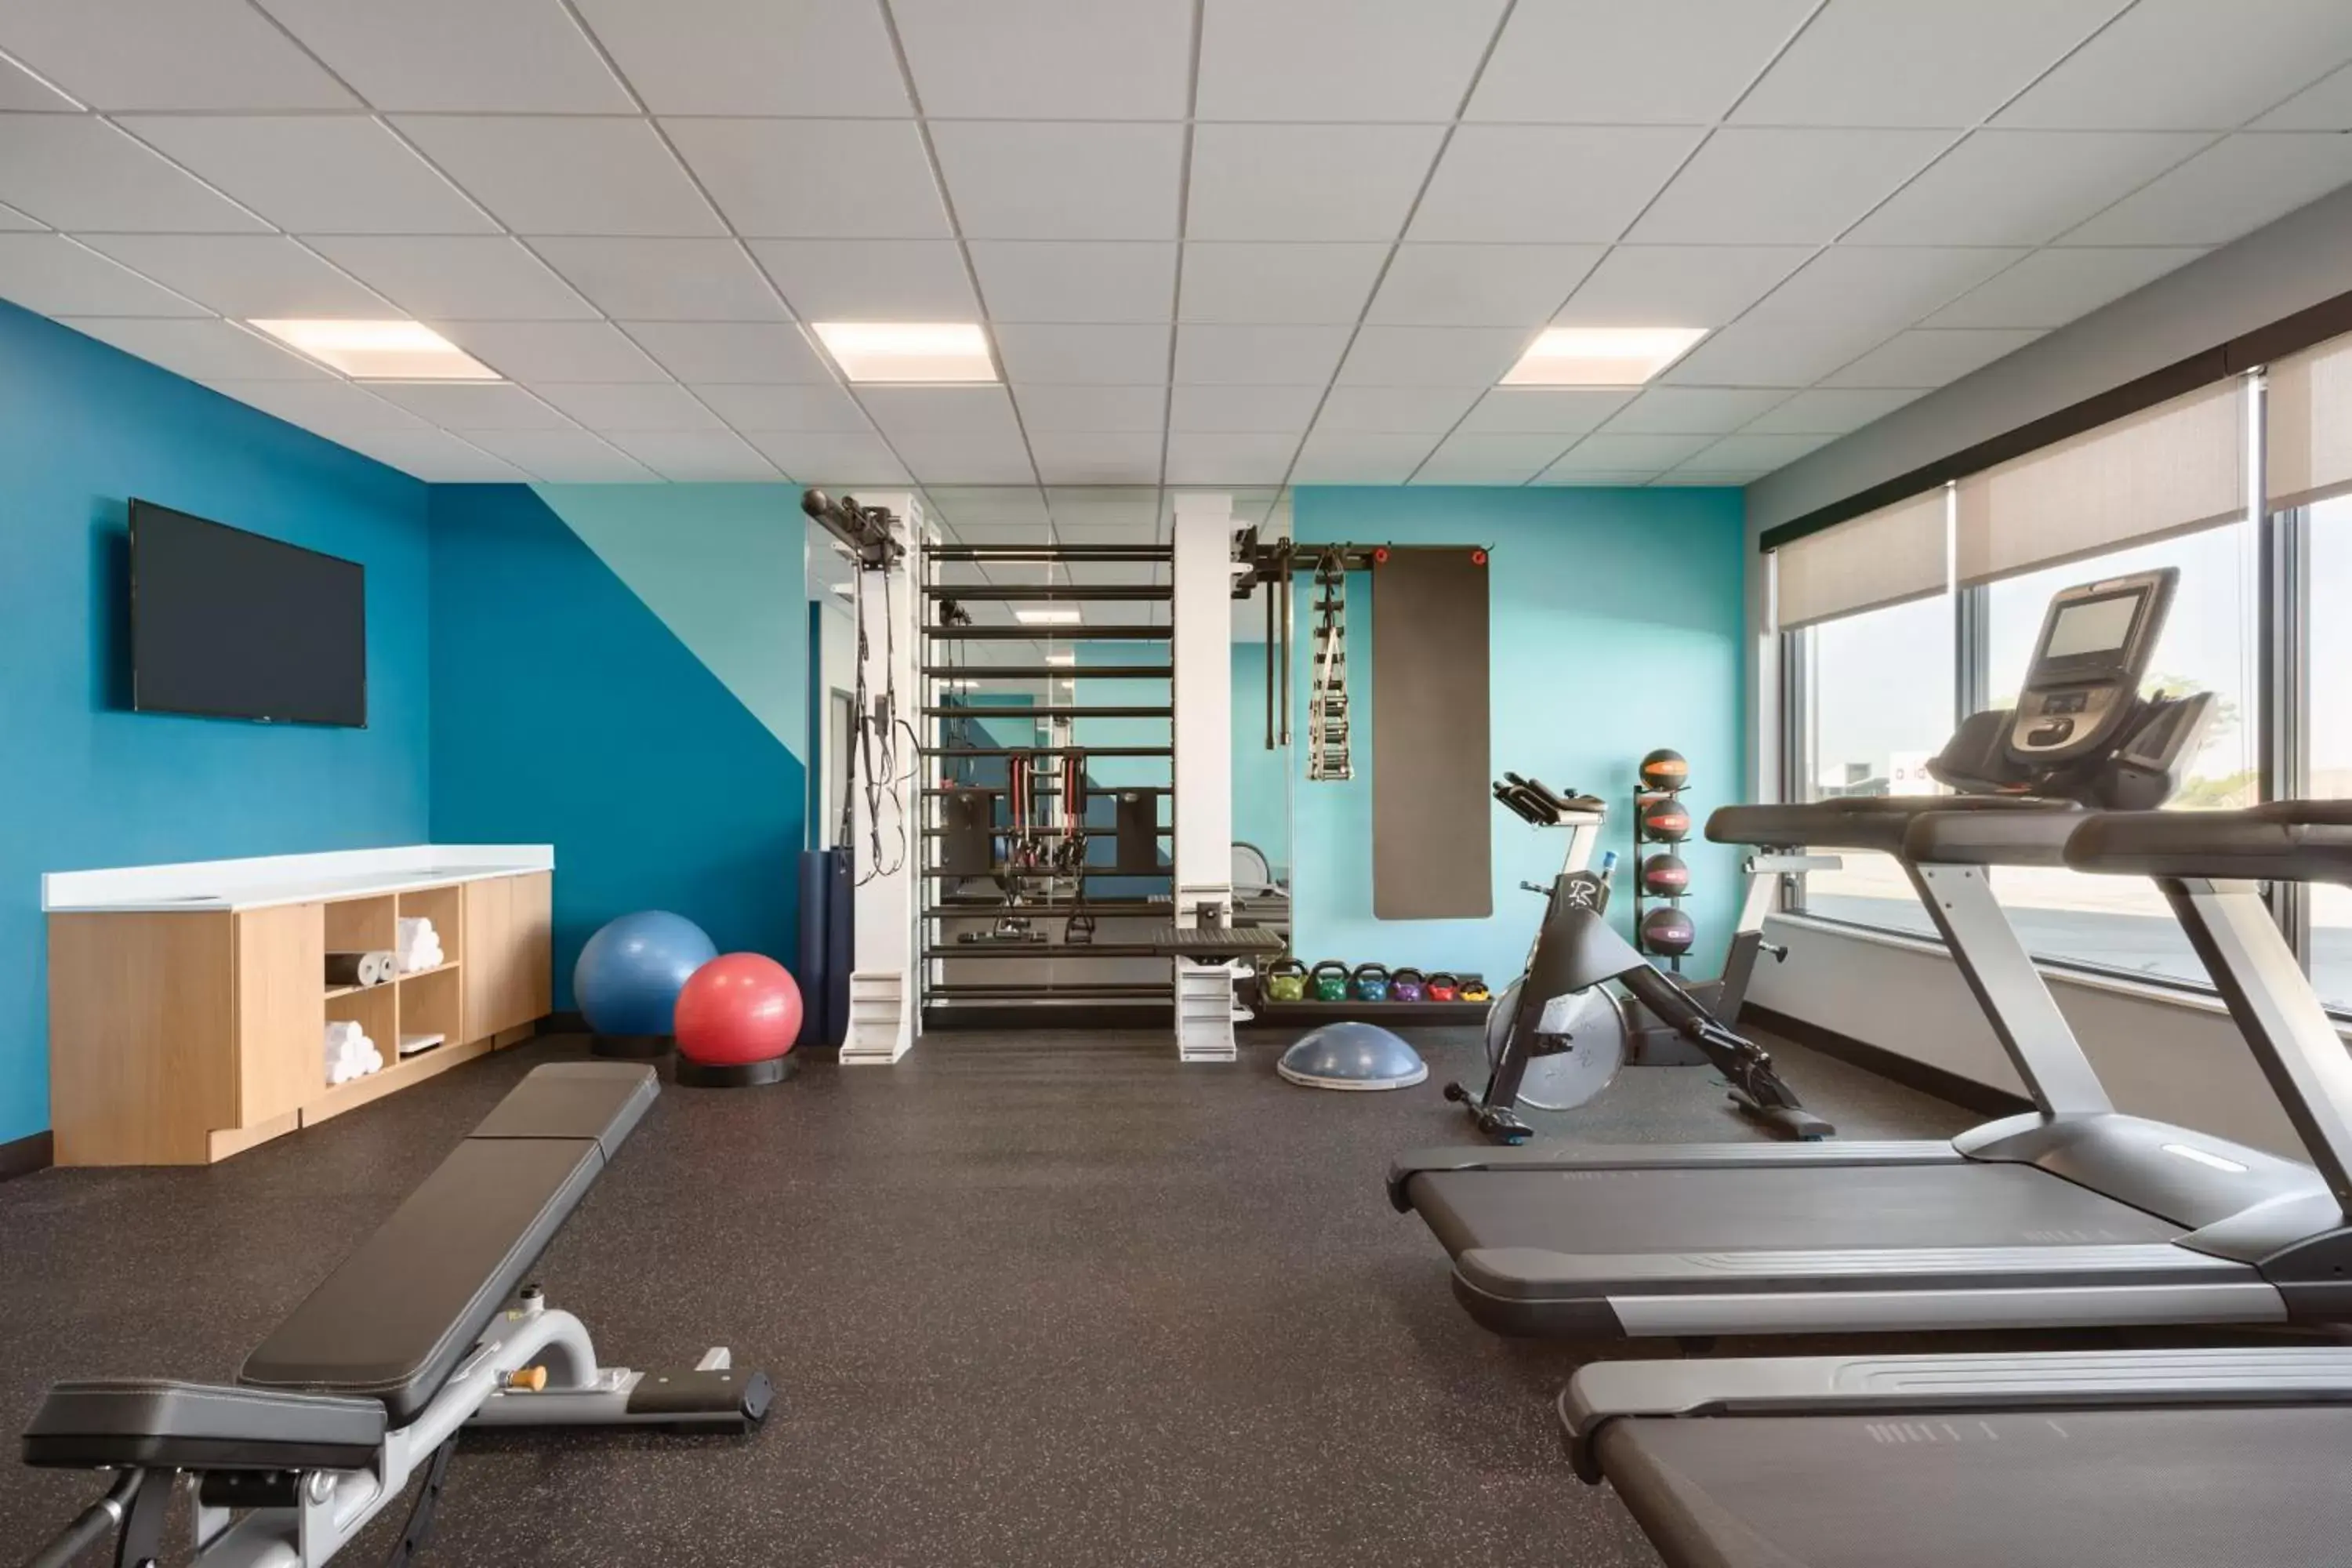 Fitness centre/facilities, Fitness Center/Facilities in avid hotels - Melbourne - Viera, an IHG Hotel